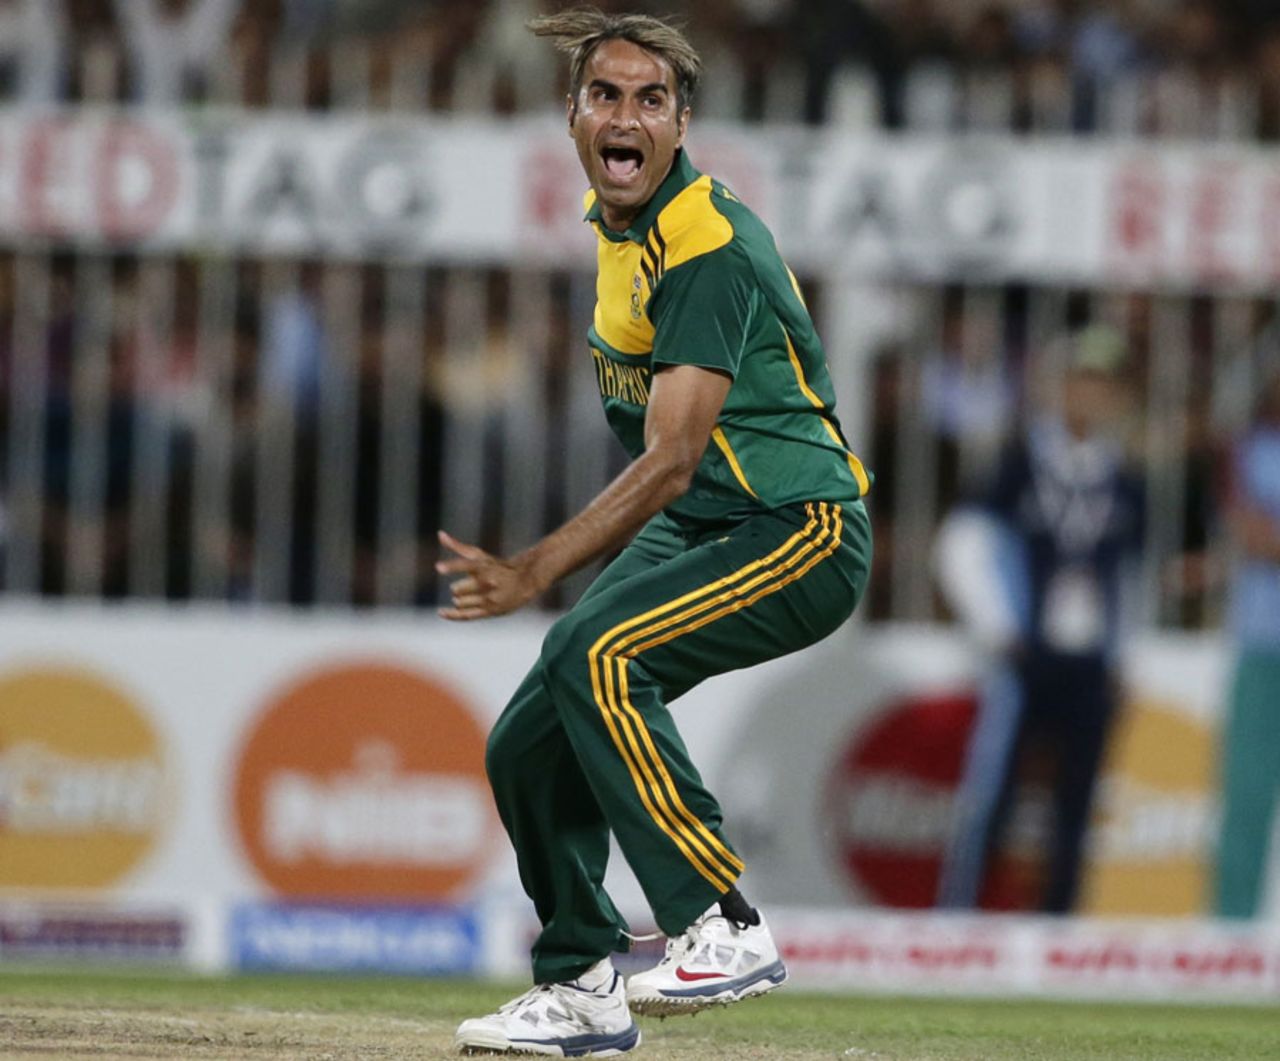 Imran Tahir's three late wickets turned the game around for South Africa, Pakistan v South Africa, 1st ODI, Sharjah, October 30, 2013